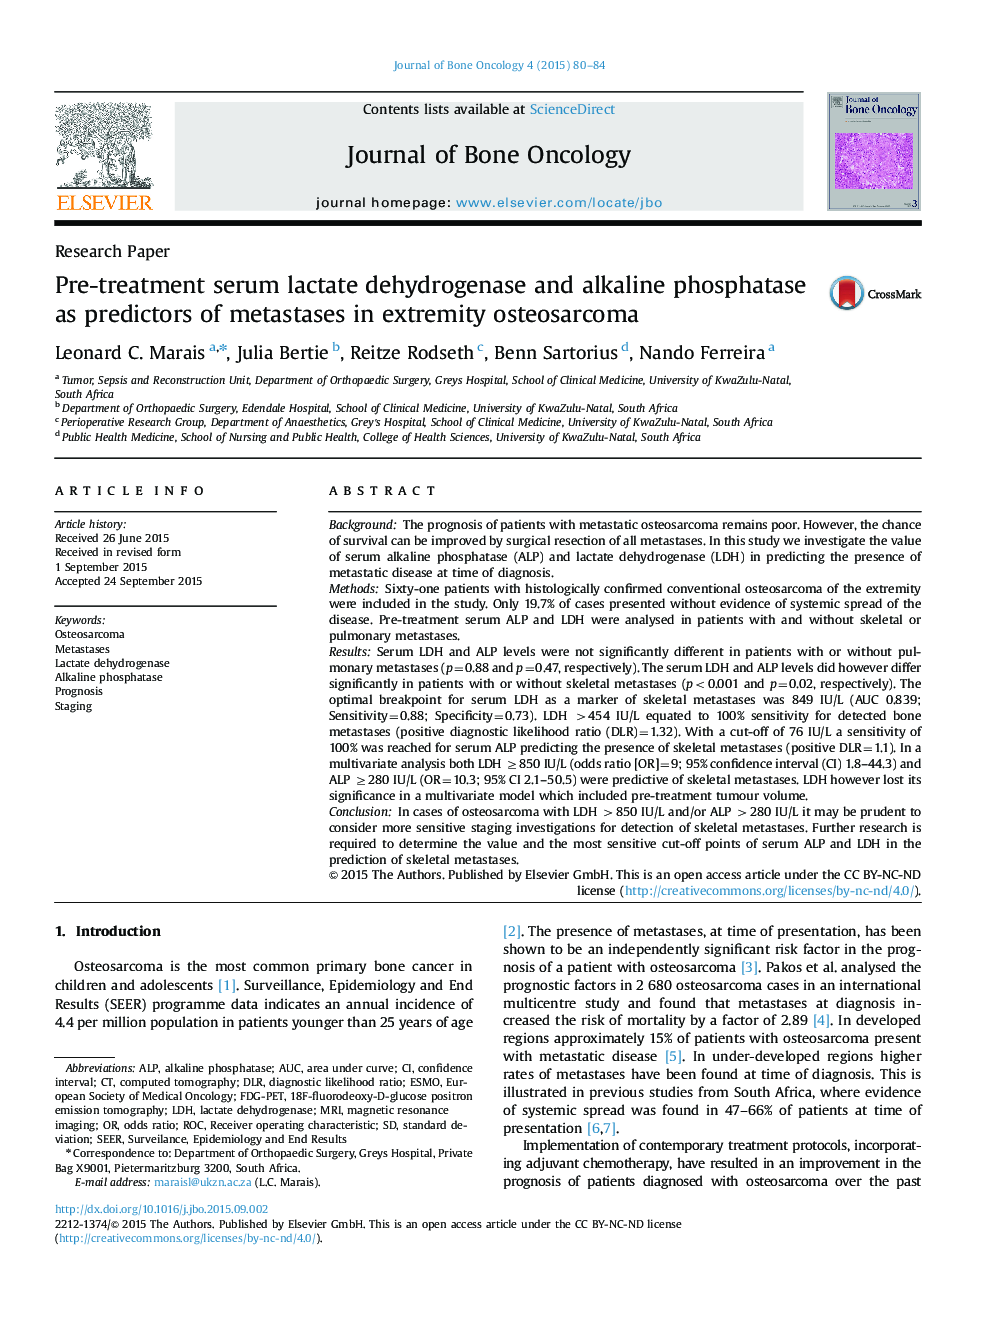 Pre-treatment serum lactate dehydrogenase and alkaline phosphatase as predictors of metastases in extremity osteosarcoma